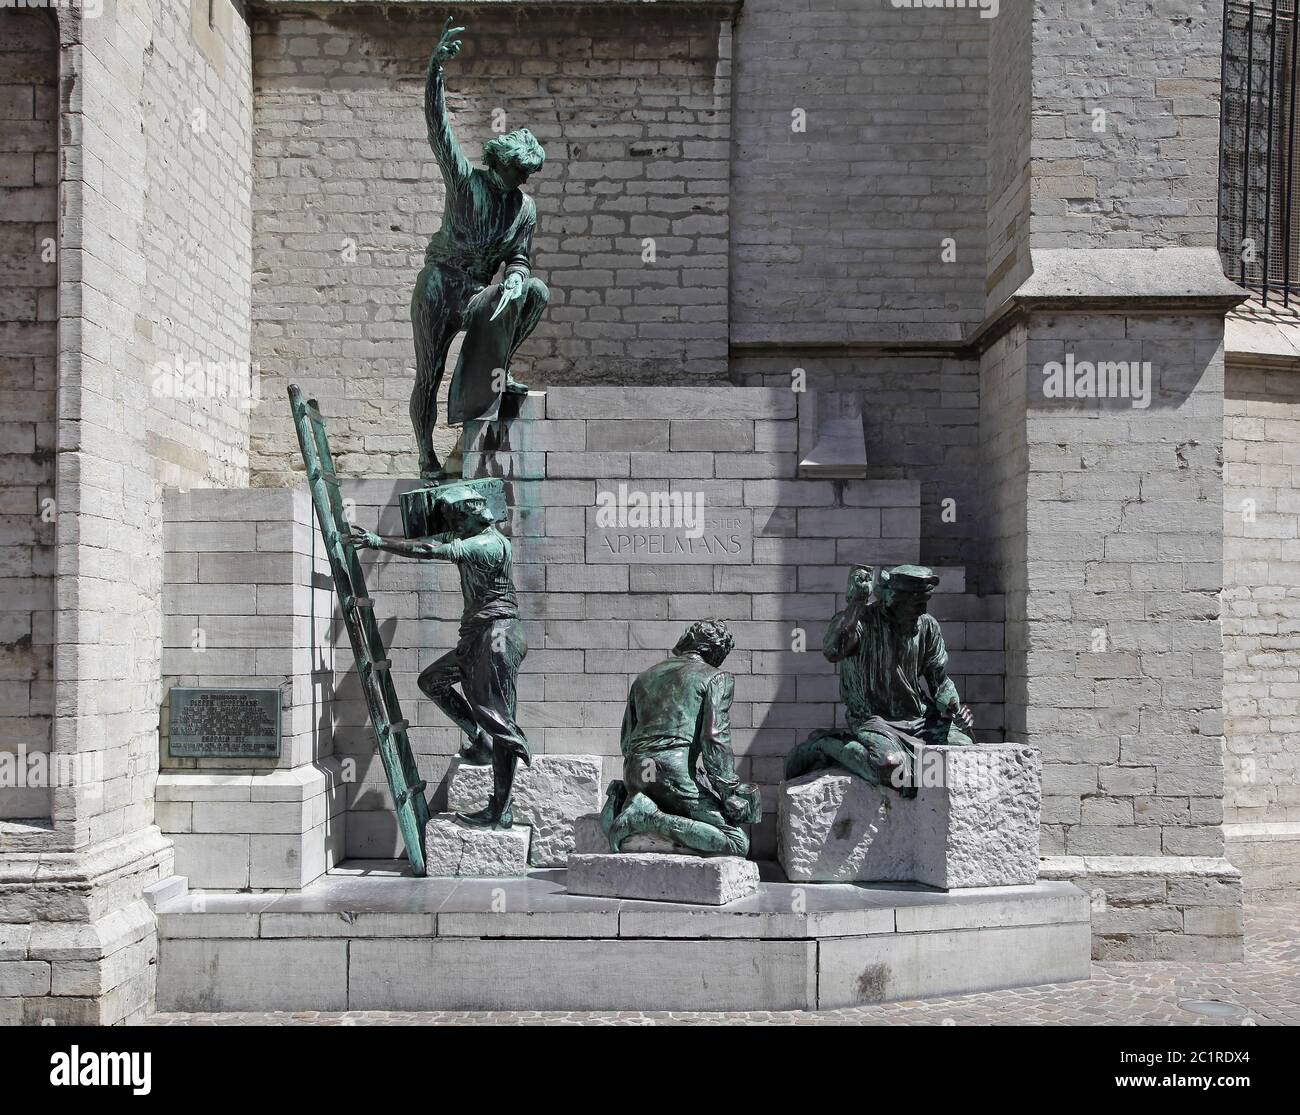 Sculpture outside The Cathedral of Our Lady Antwerp Belgium.Honouring architect Pieter Appelmans Stock Photo